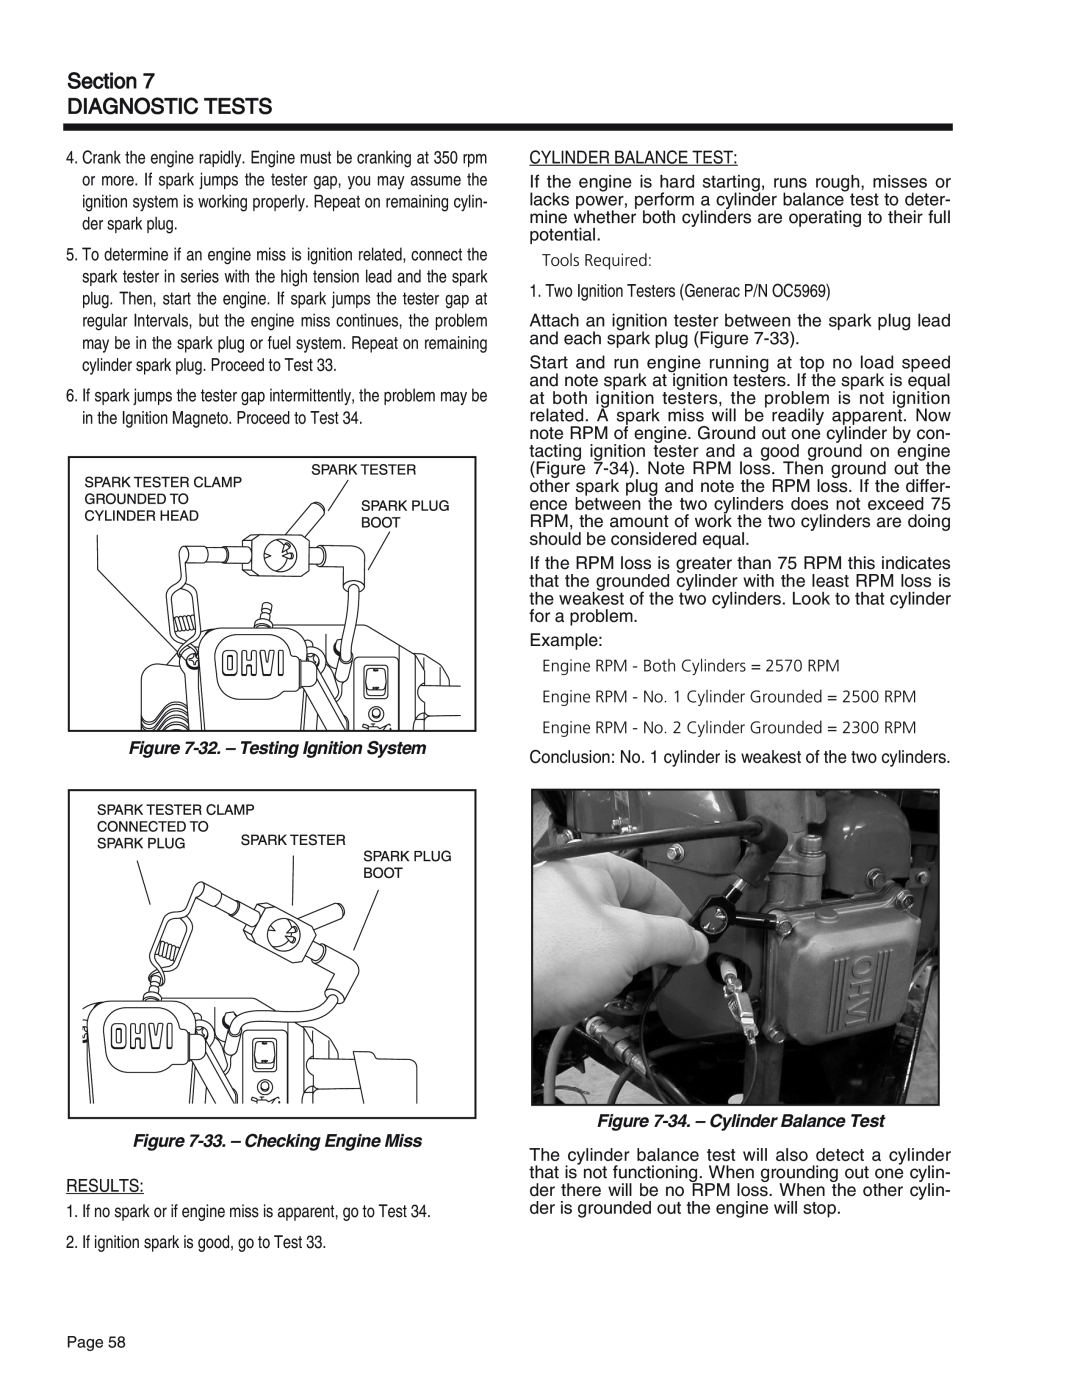 Generac Power Systems 55, 75, 65 manual 32.– Testing Ignition System, 33.– Checking Engine Miss, 34.- Cylinder Balance Test 